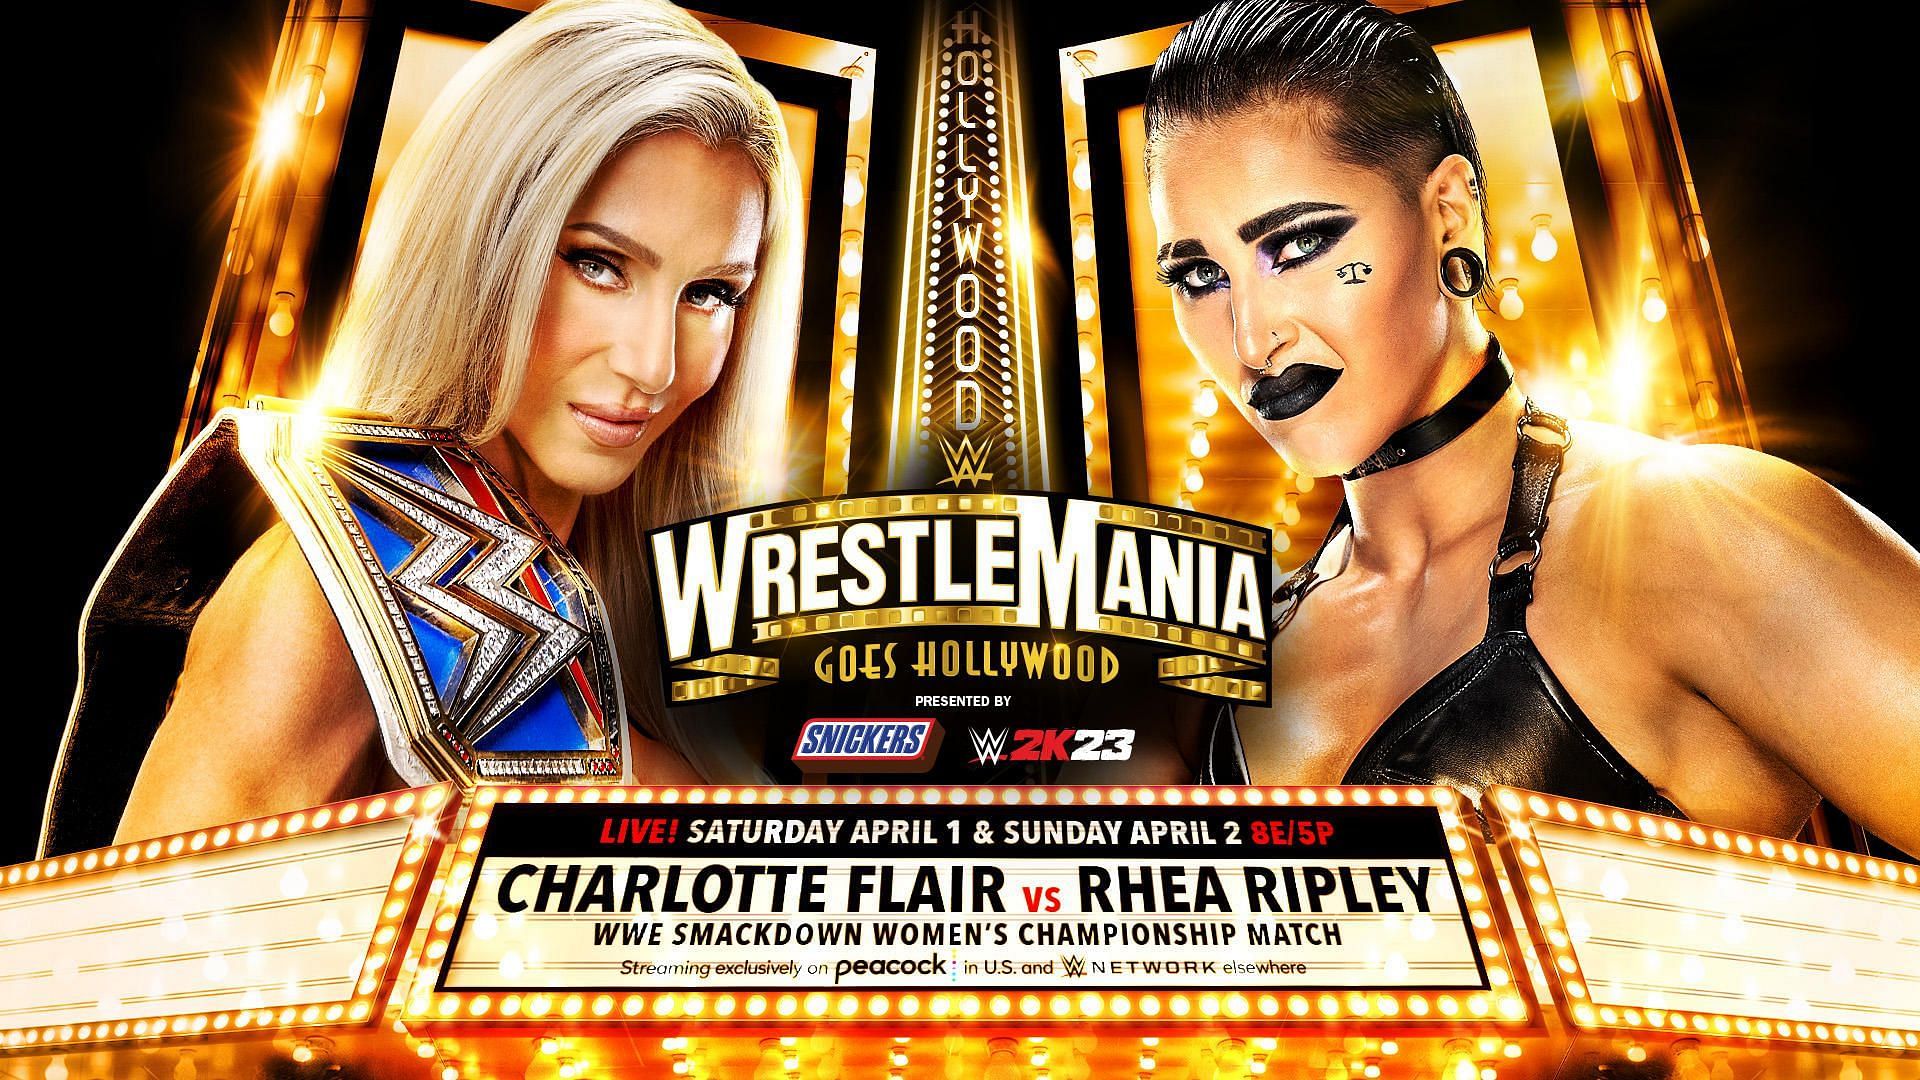 Charlotte Flair will collide with Rhea Ripley for the SmackDown Women